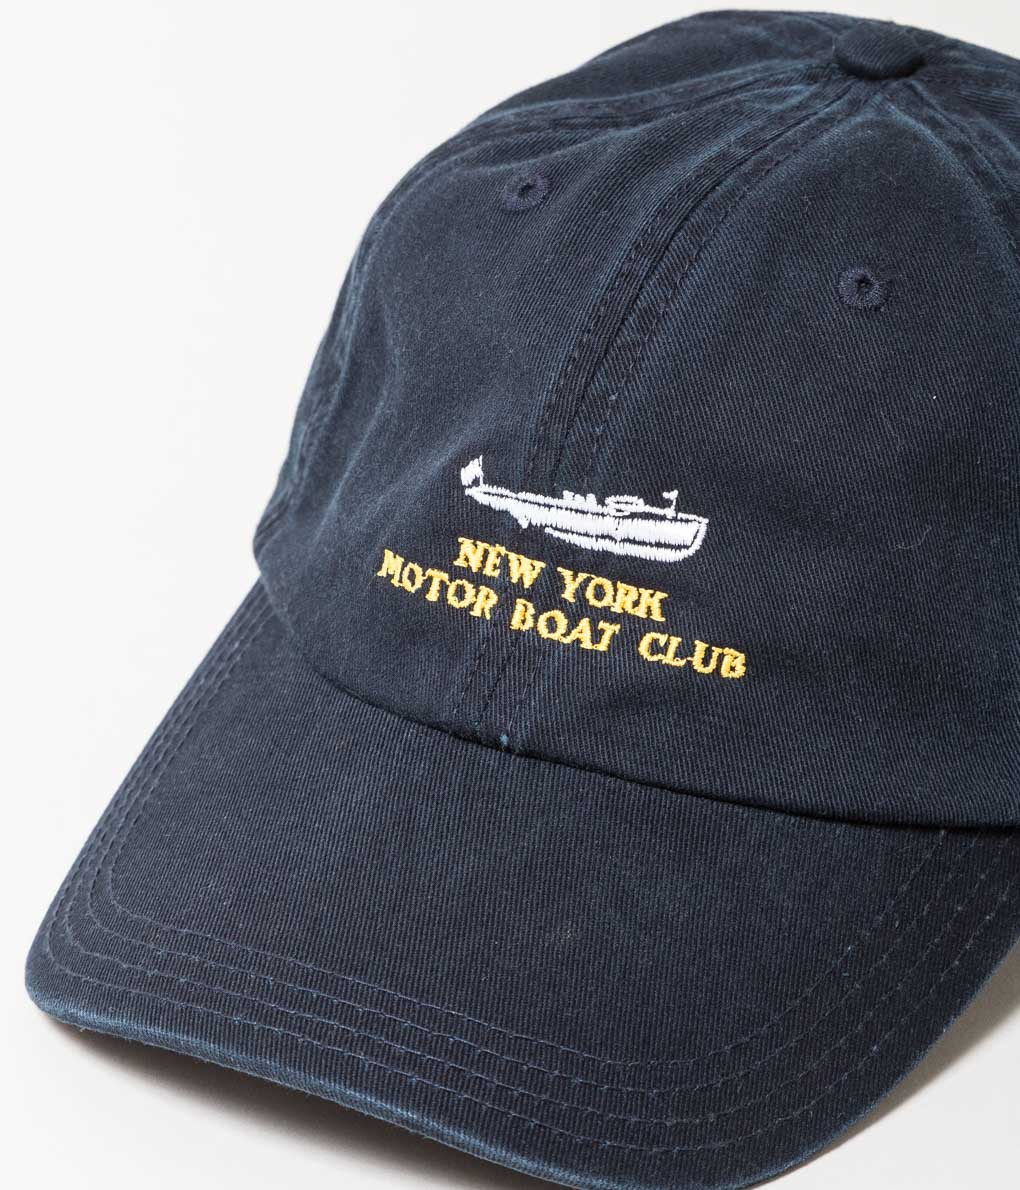 OLD SOLDIER "BOAT CLUB CAPS" (NAVY)